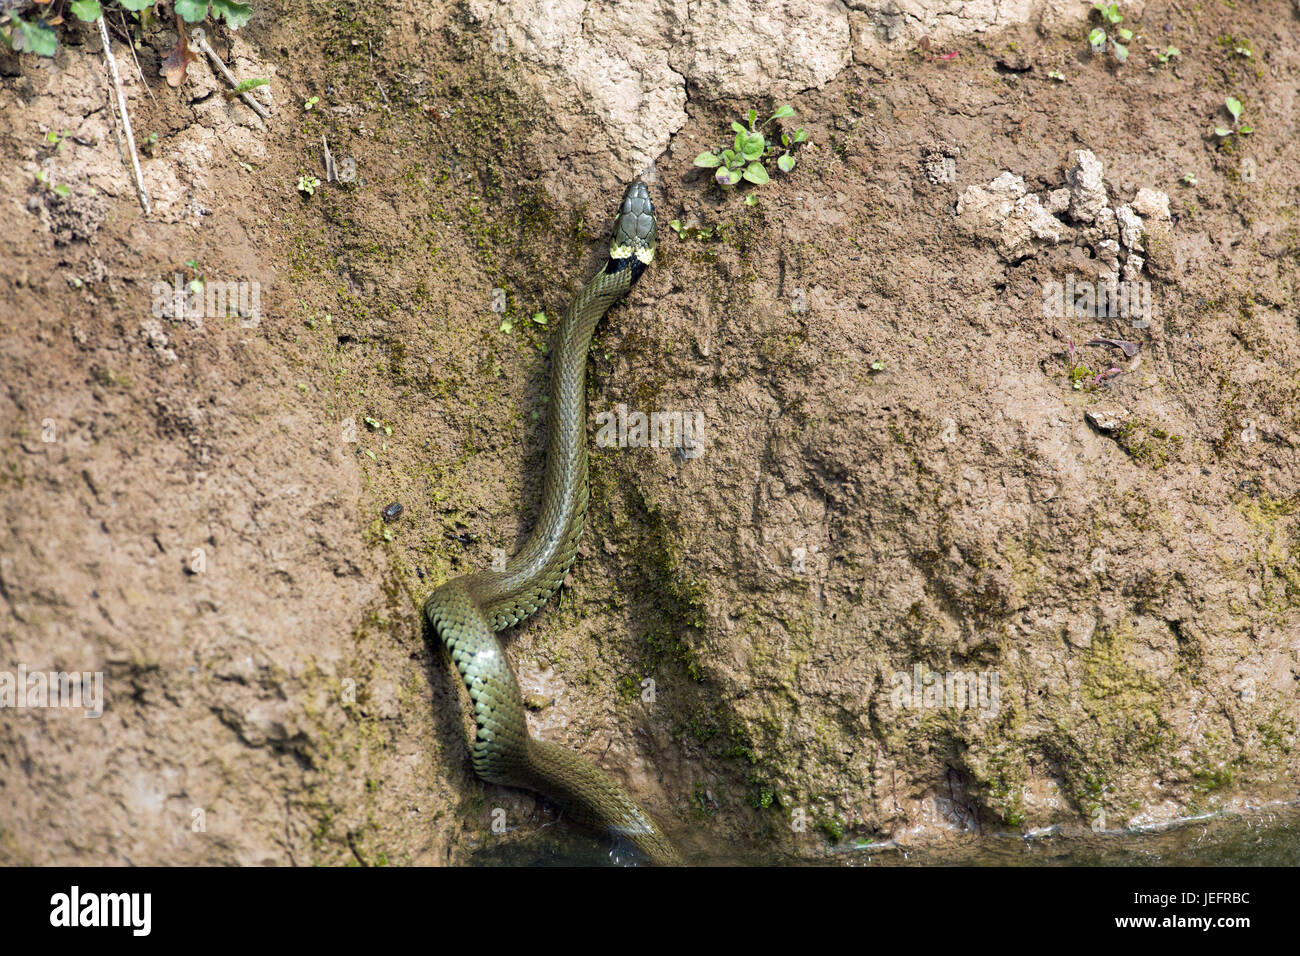 Grass Snake Natrix natrix. Climbing up the bank of a stream, using muscular body and ventral scales in attempts to gain purchase on the wet clay surfa Stock Photo